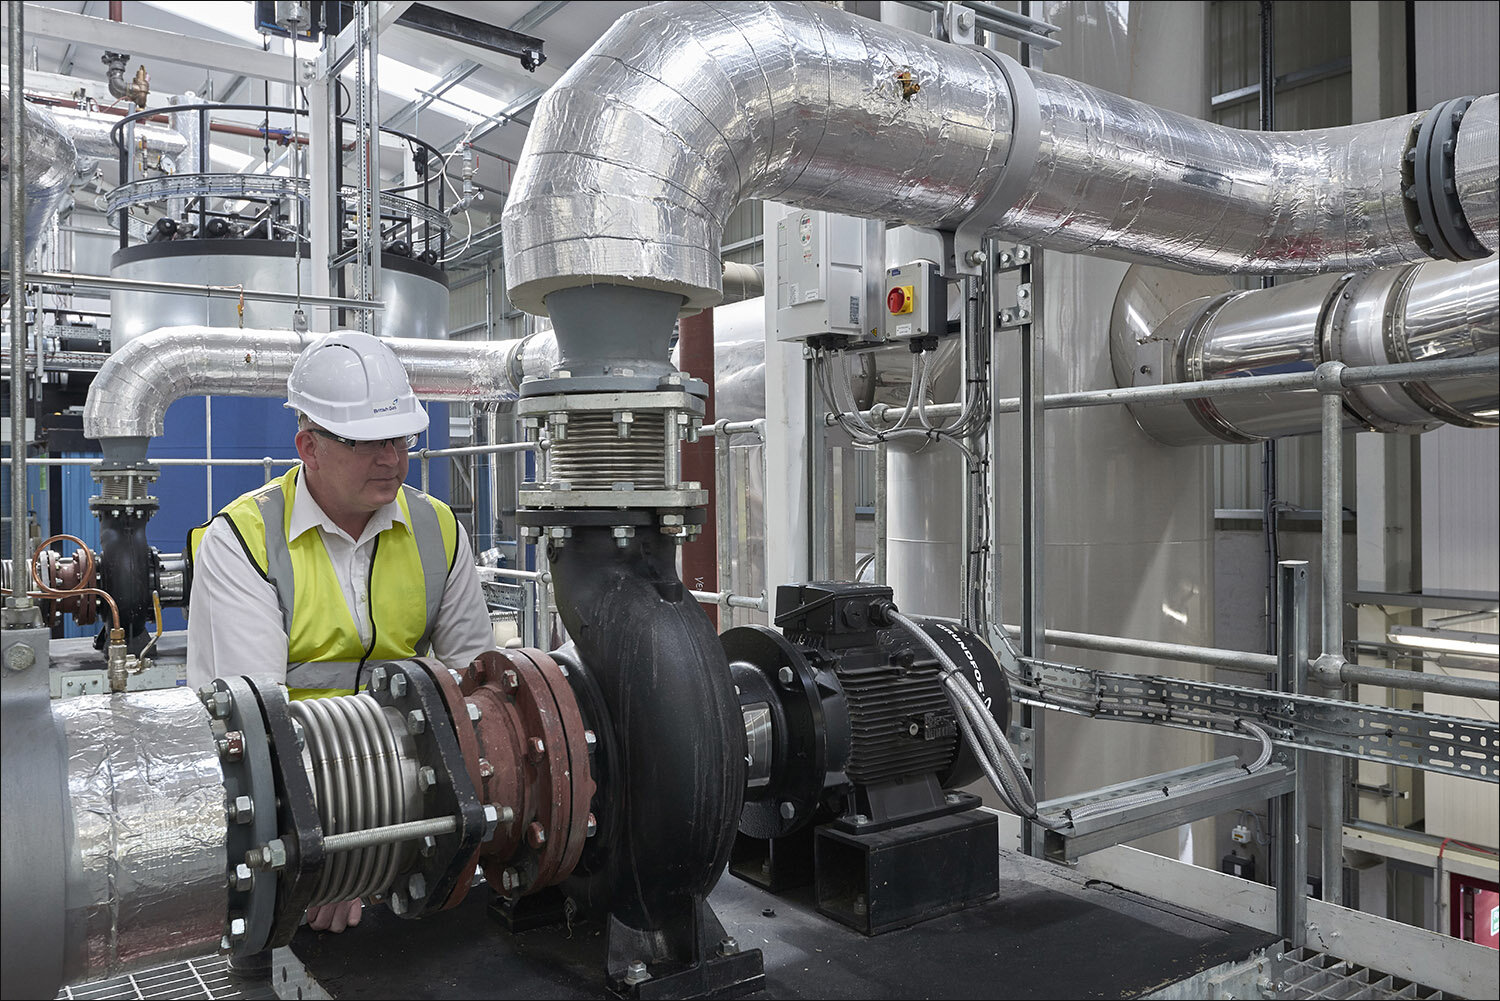 British Gas engineer working inside a factory with steel pipework